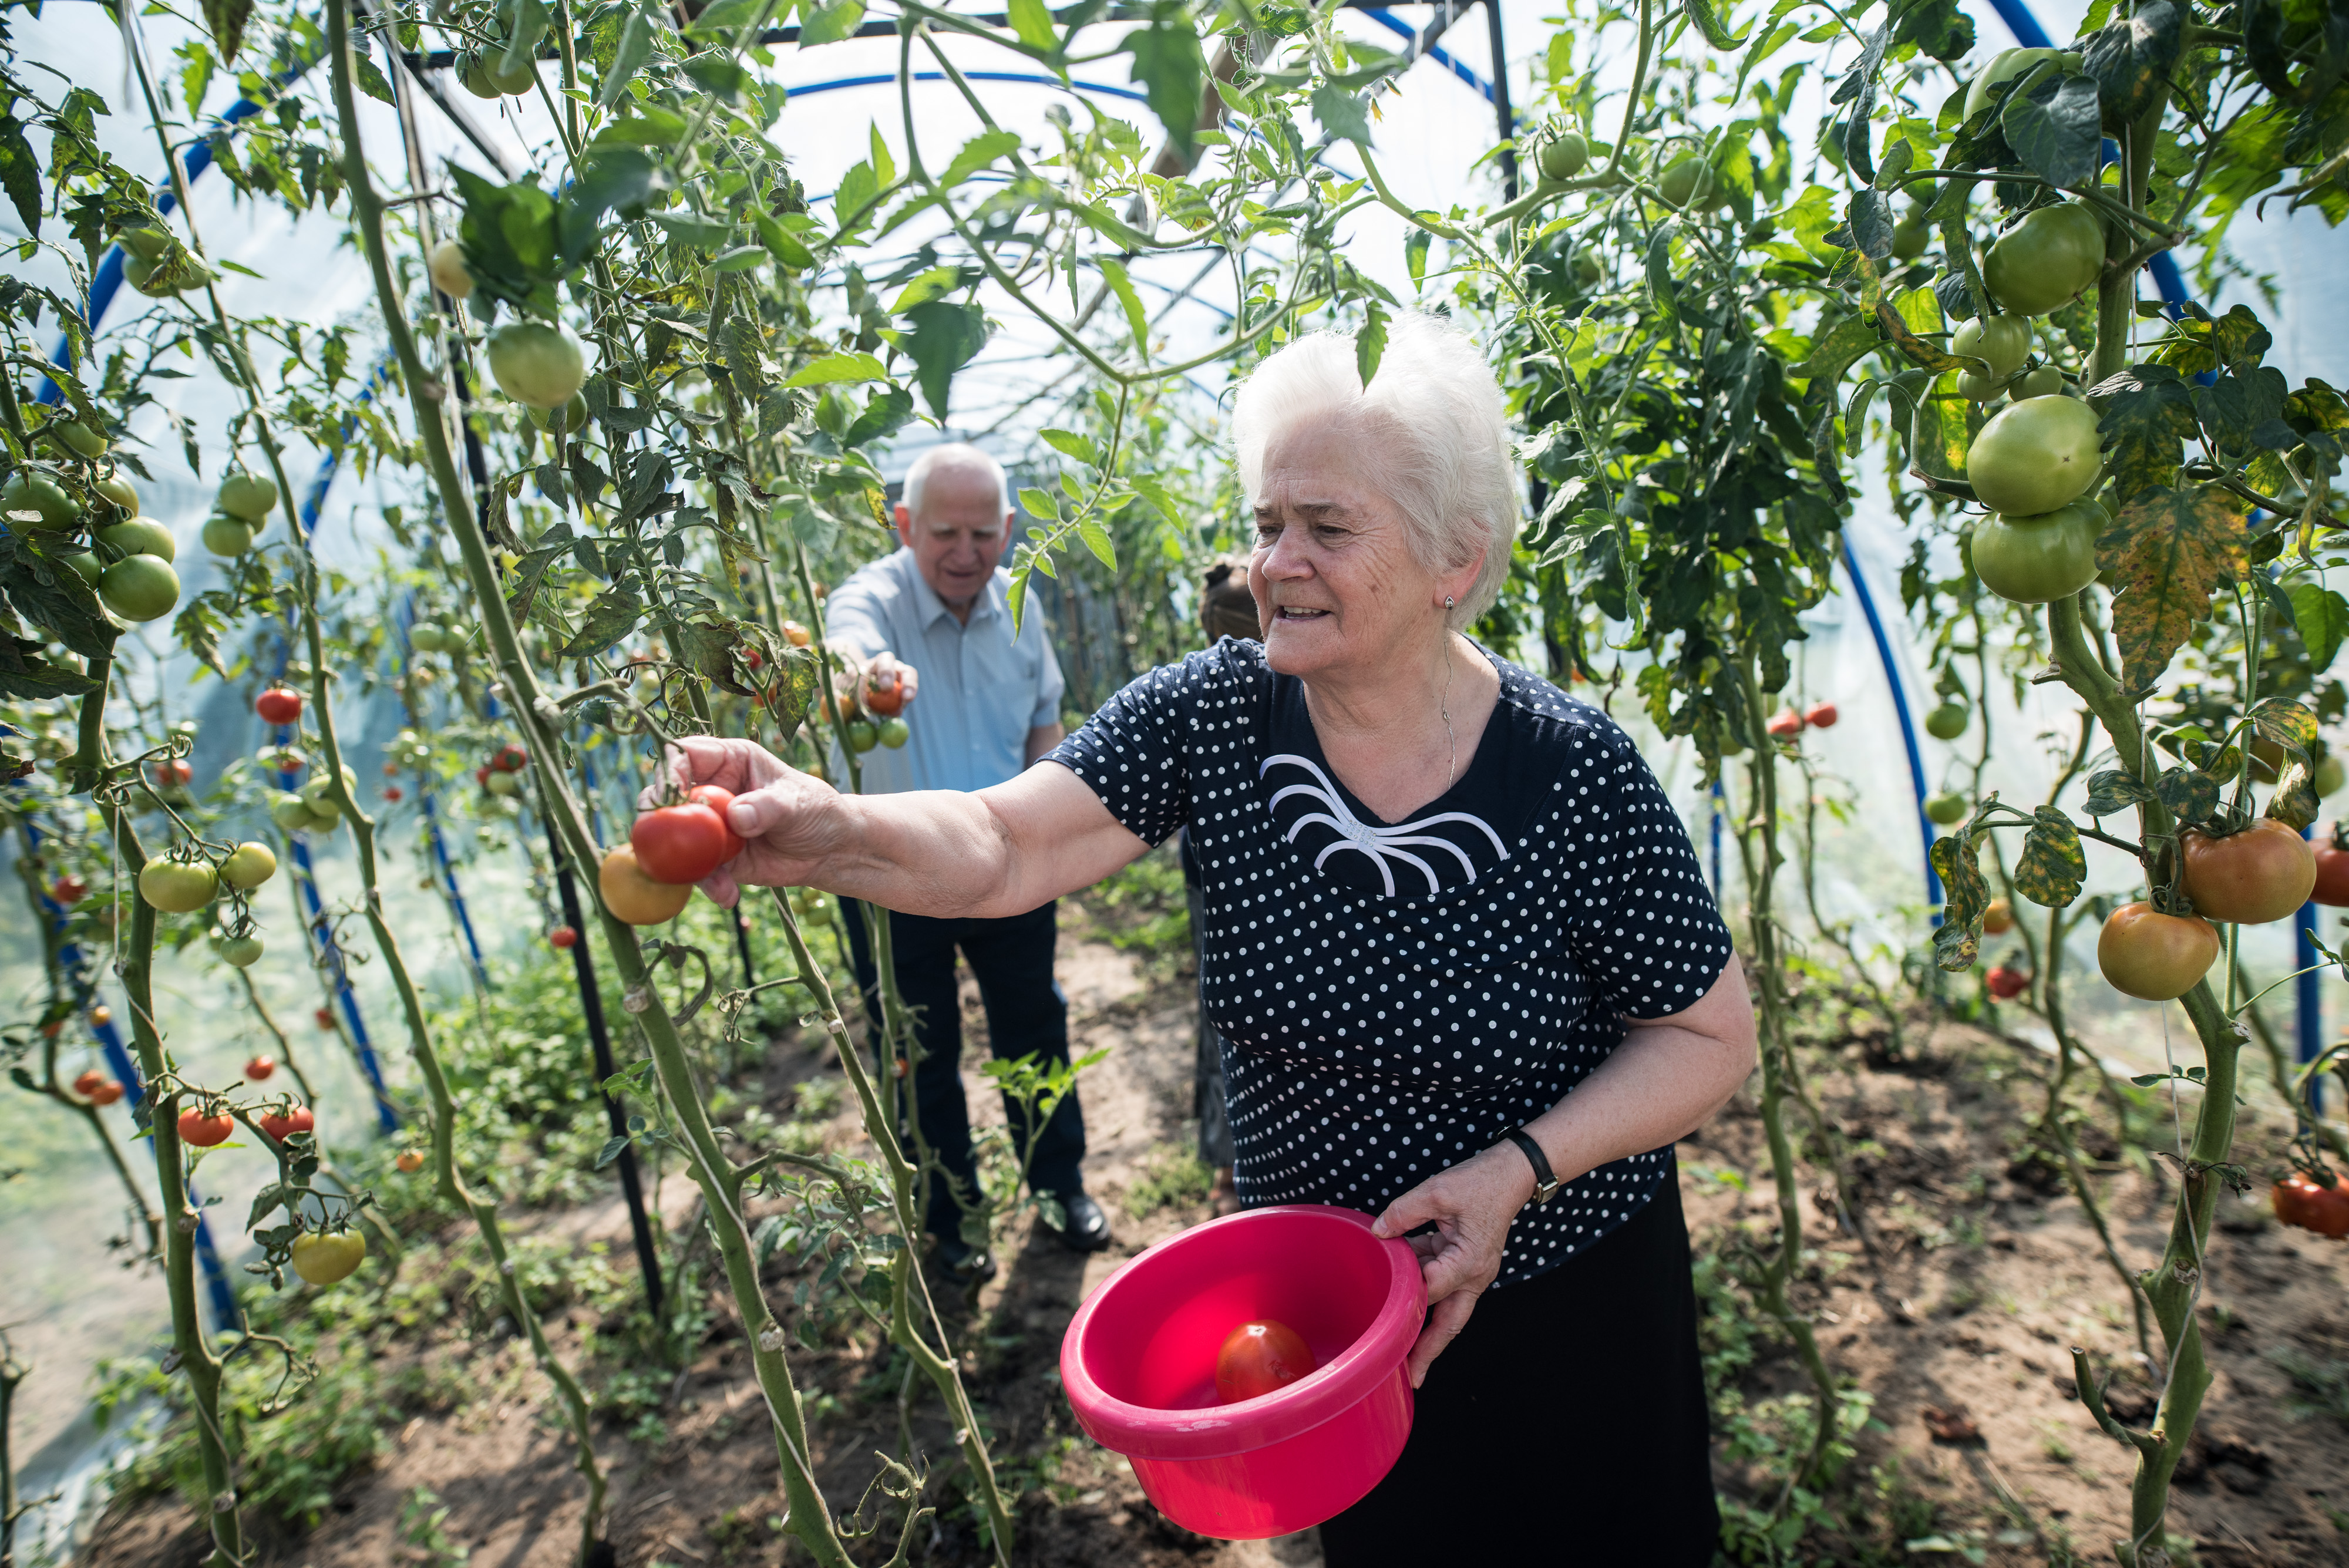 The photo presents seniors growing tomatoes on the "Green Care" farm.